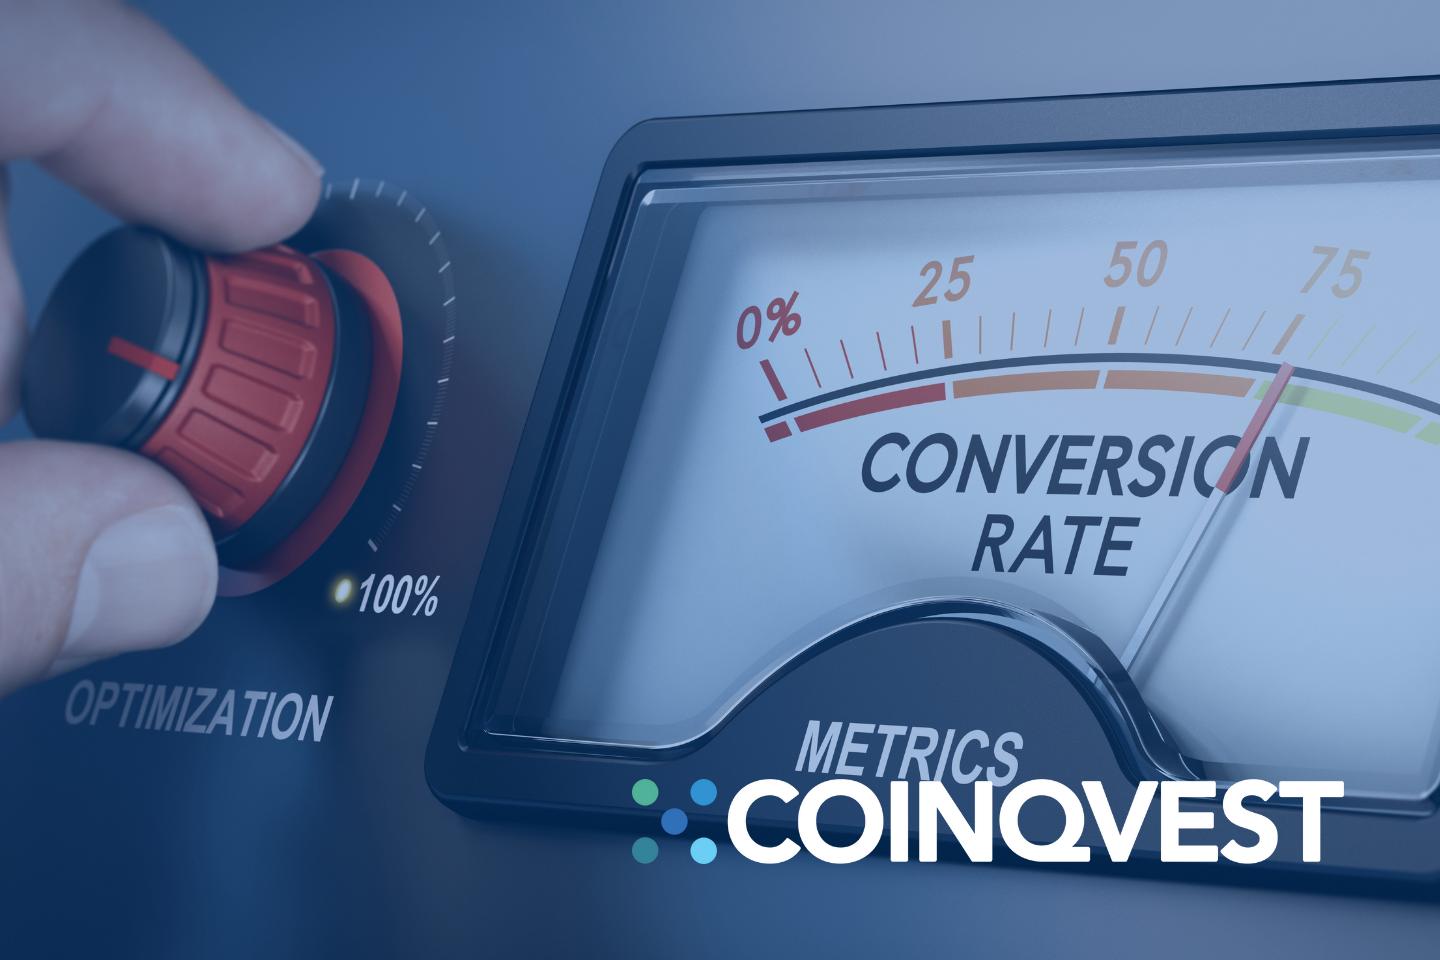 10 Simple Steps To Doubling Your Online Store's Conversion Rate